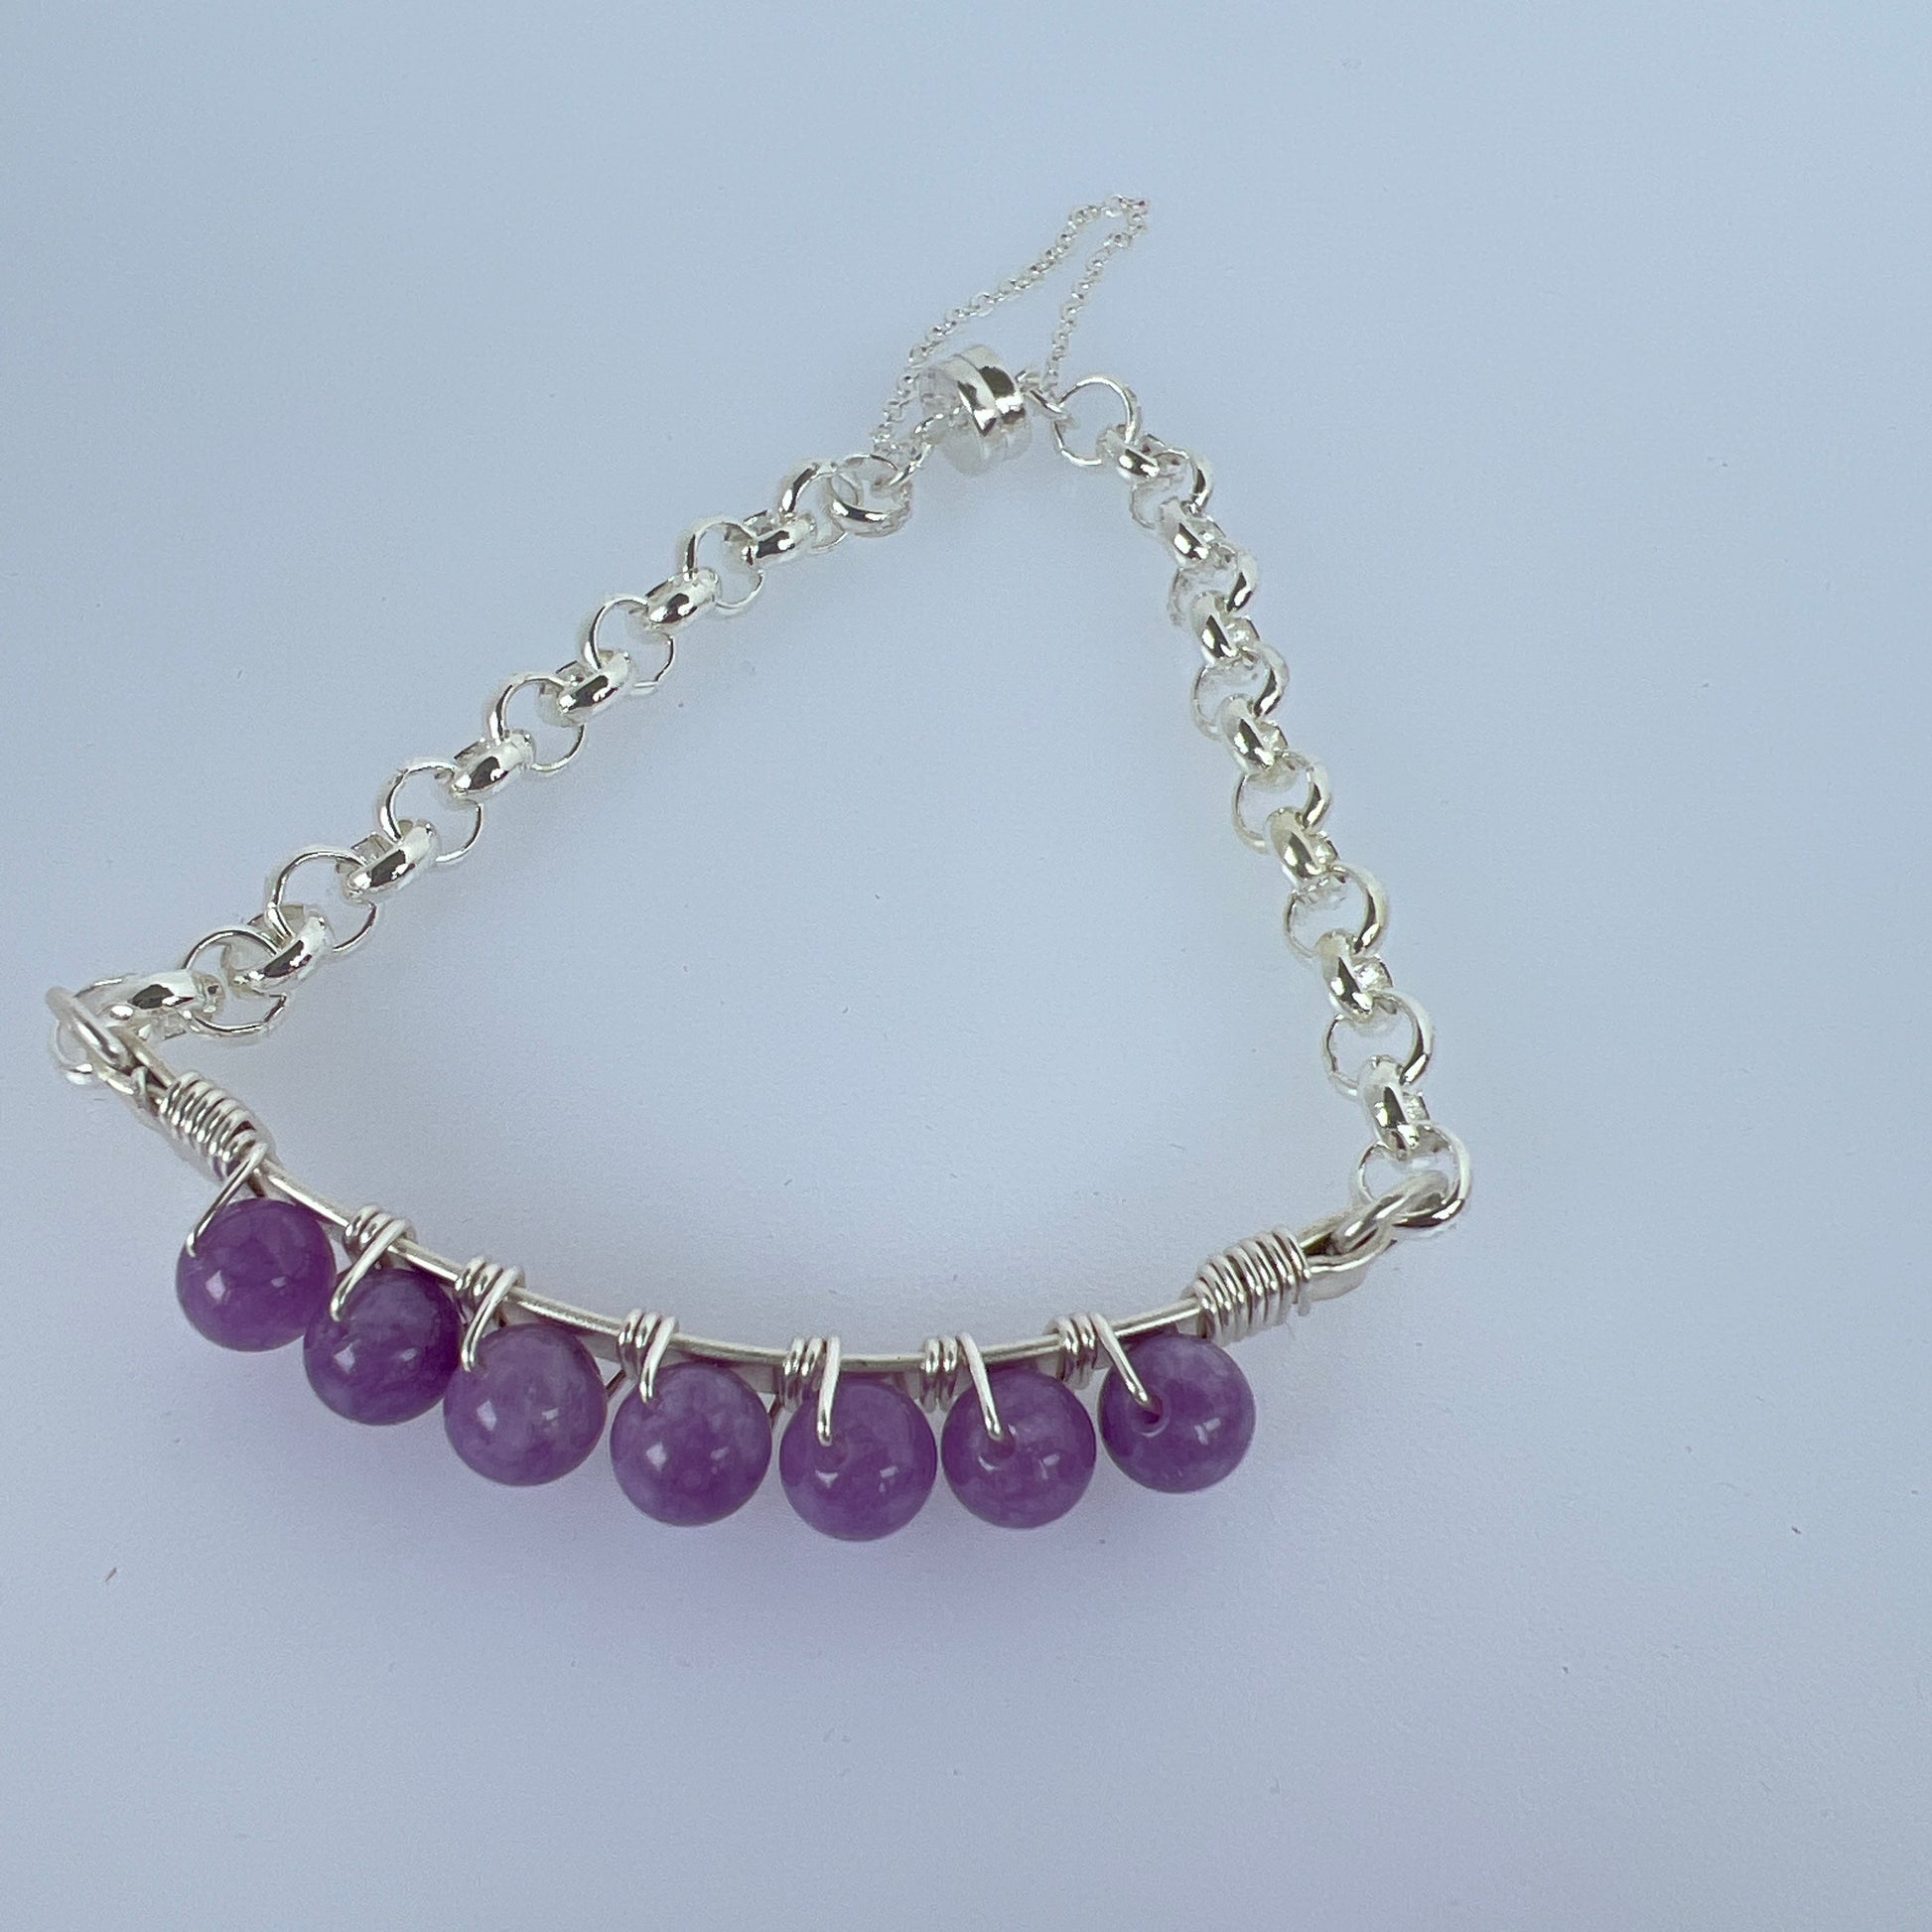 6mm lepidolite beads wire wrapped on silver plated with silver plate magnet bracelet